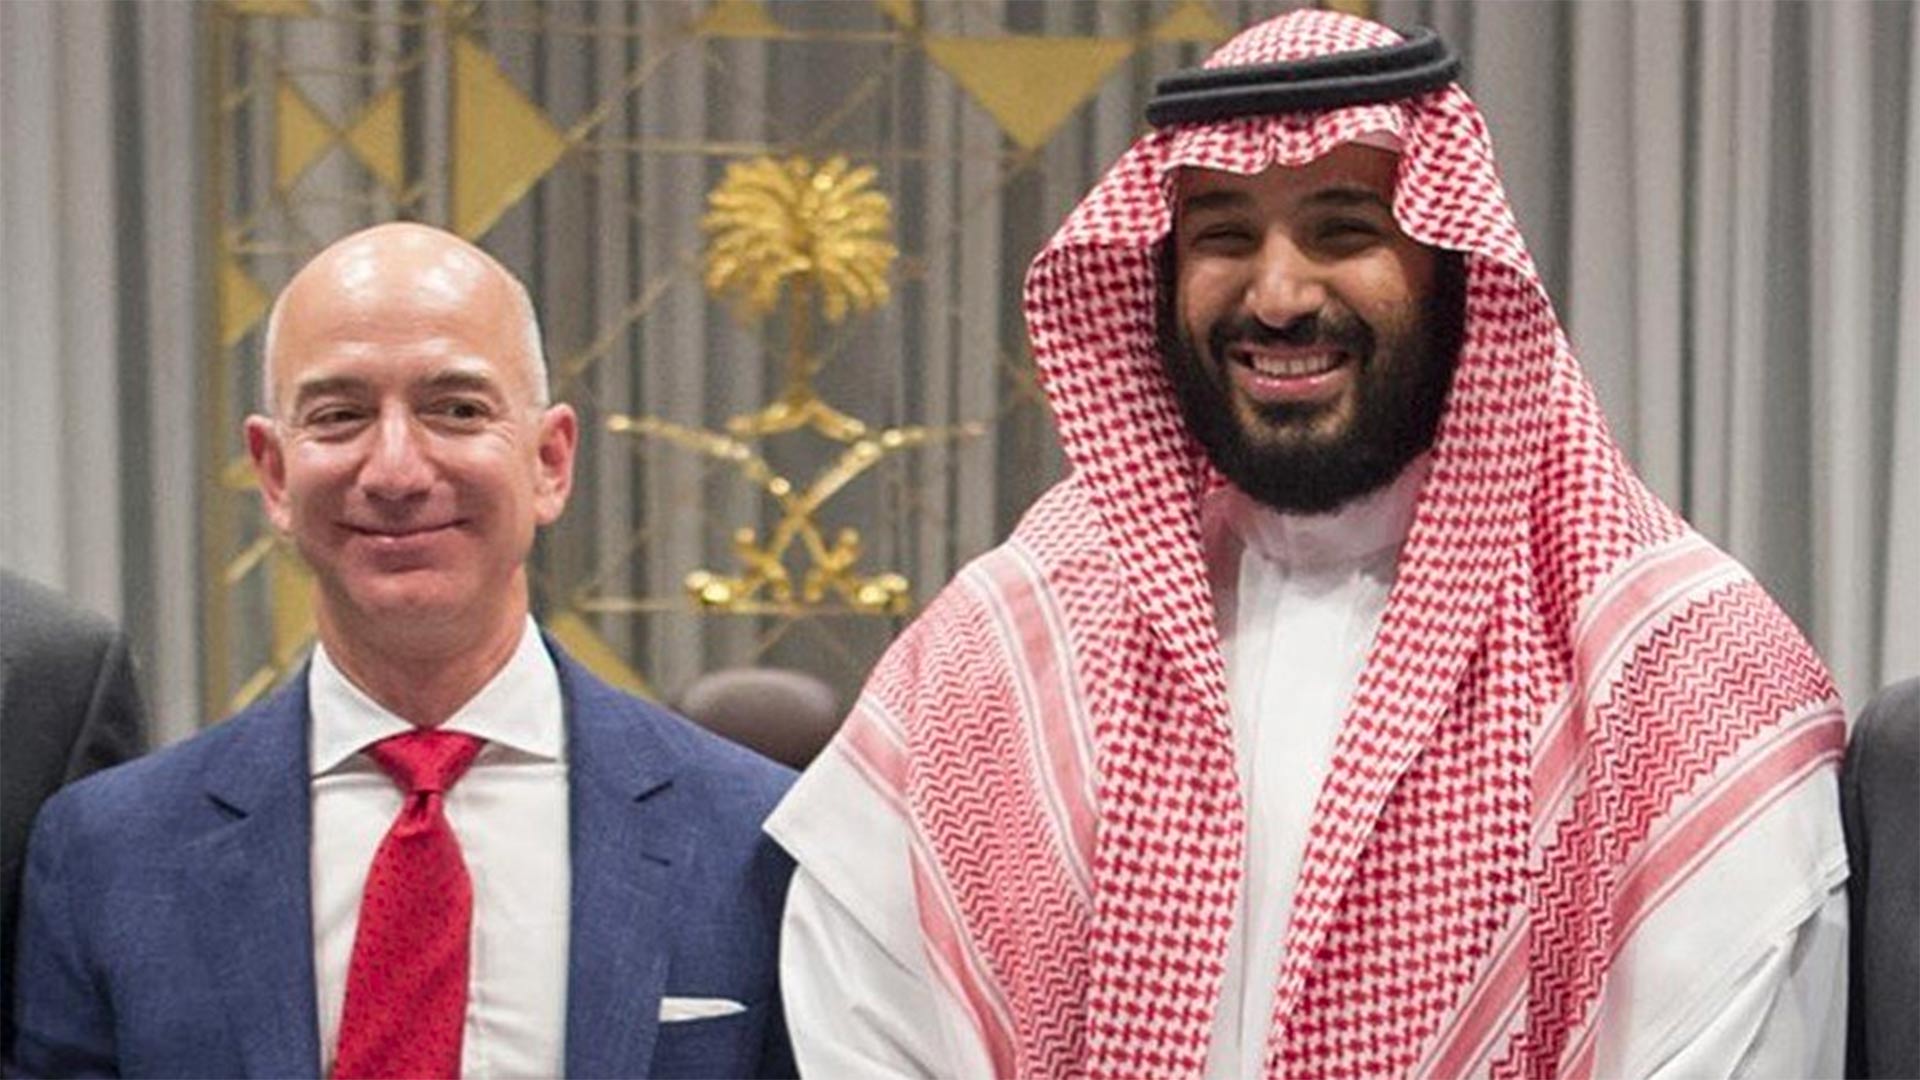 The phone of Jeff Bezos allegedly was hacked via a WhatsApp account held by Saudi Crown Prince Mohammed bin Salman.